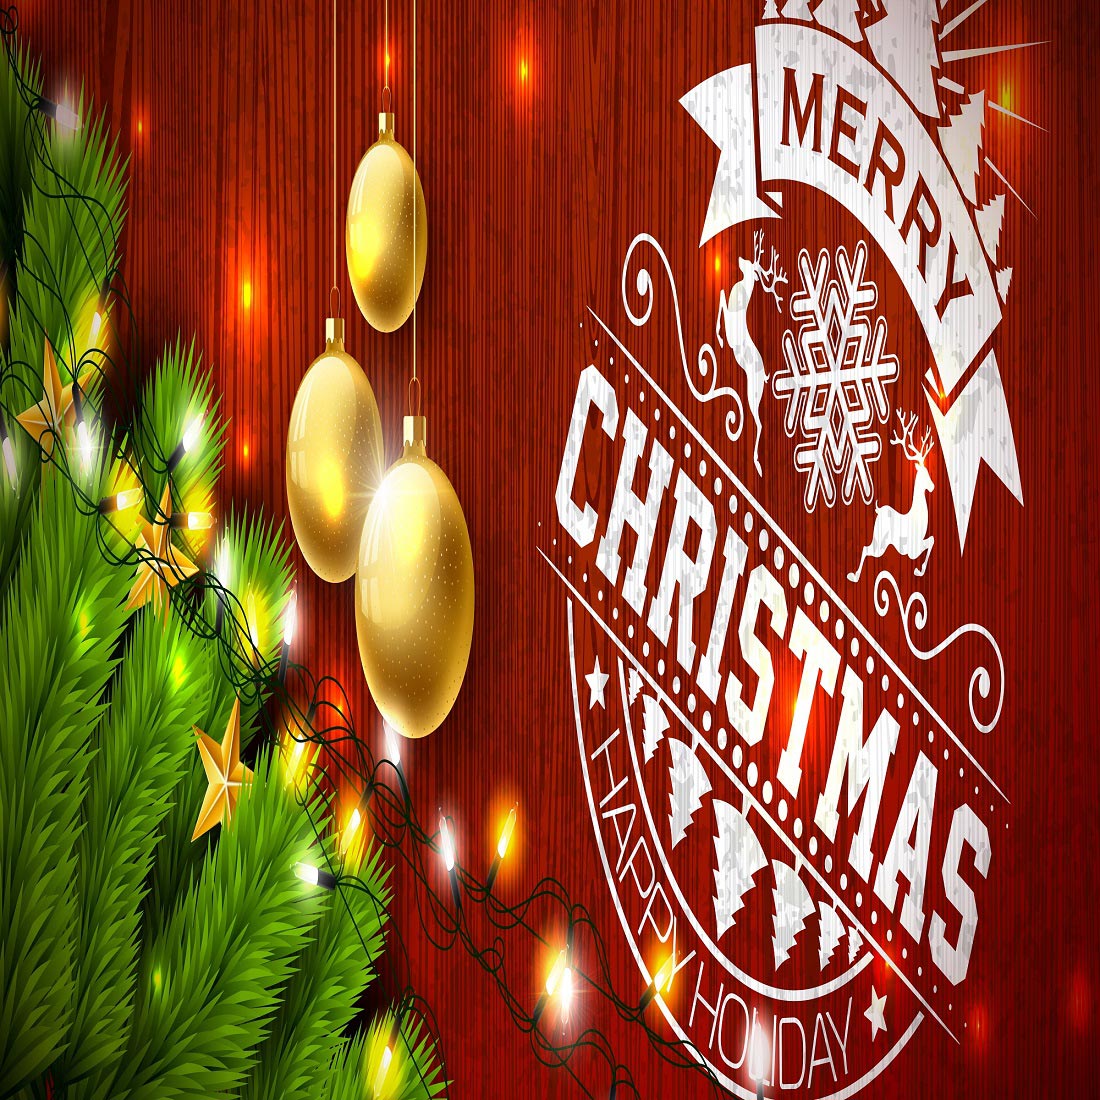 merry christmas happy new year design with gold glass ball lights garland wood background 955